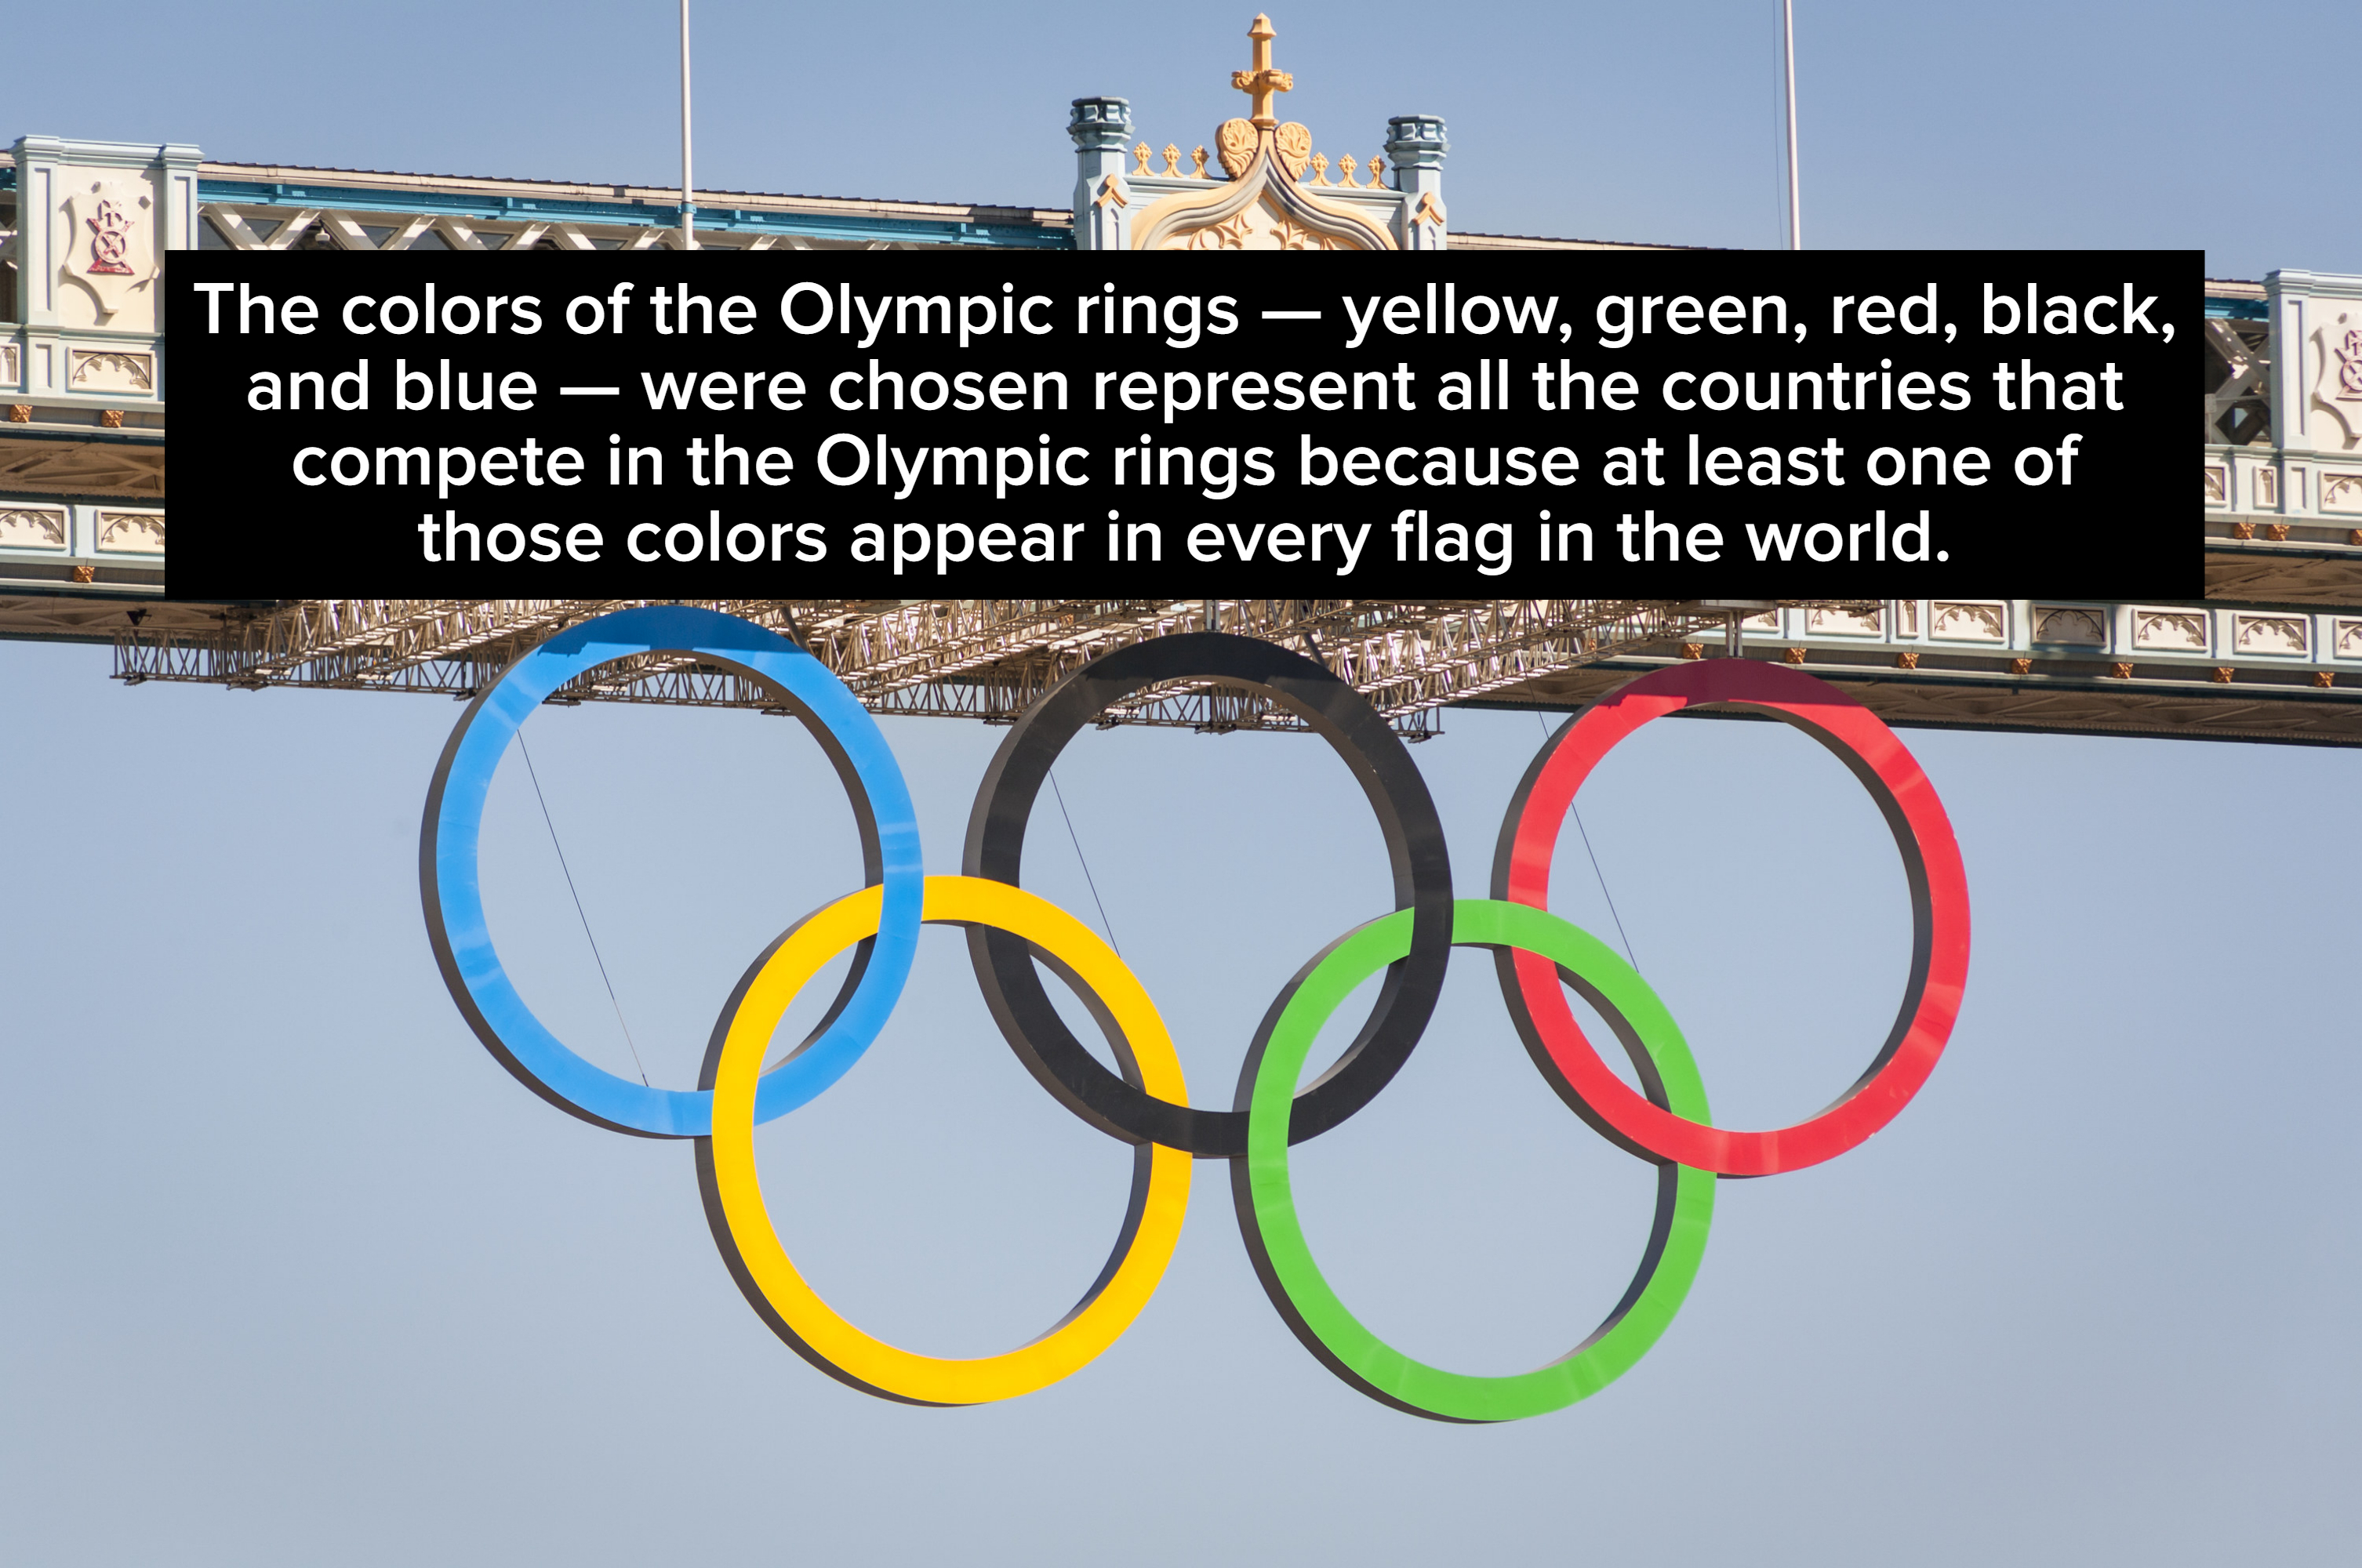 100,000 Olympic rings Vector Images | Depositphotos